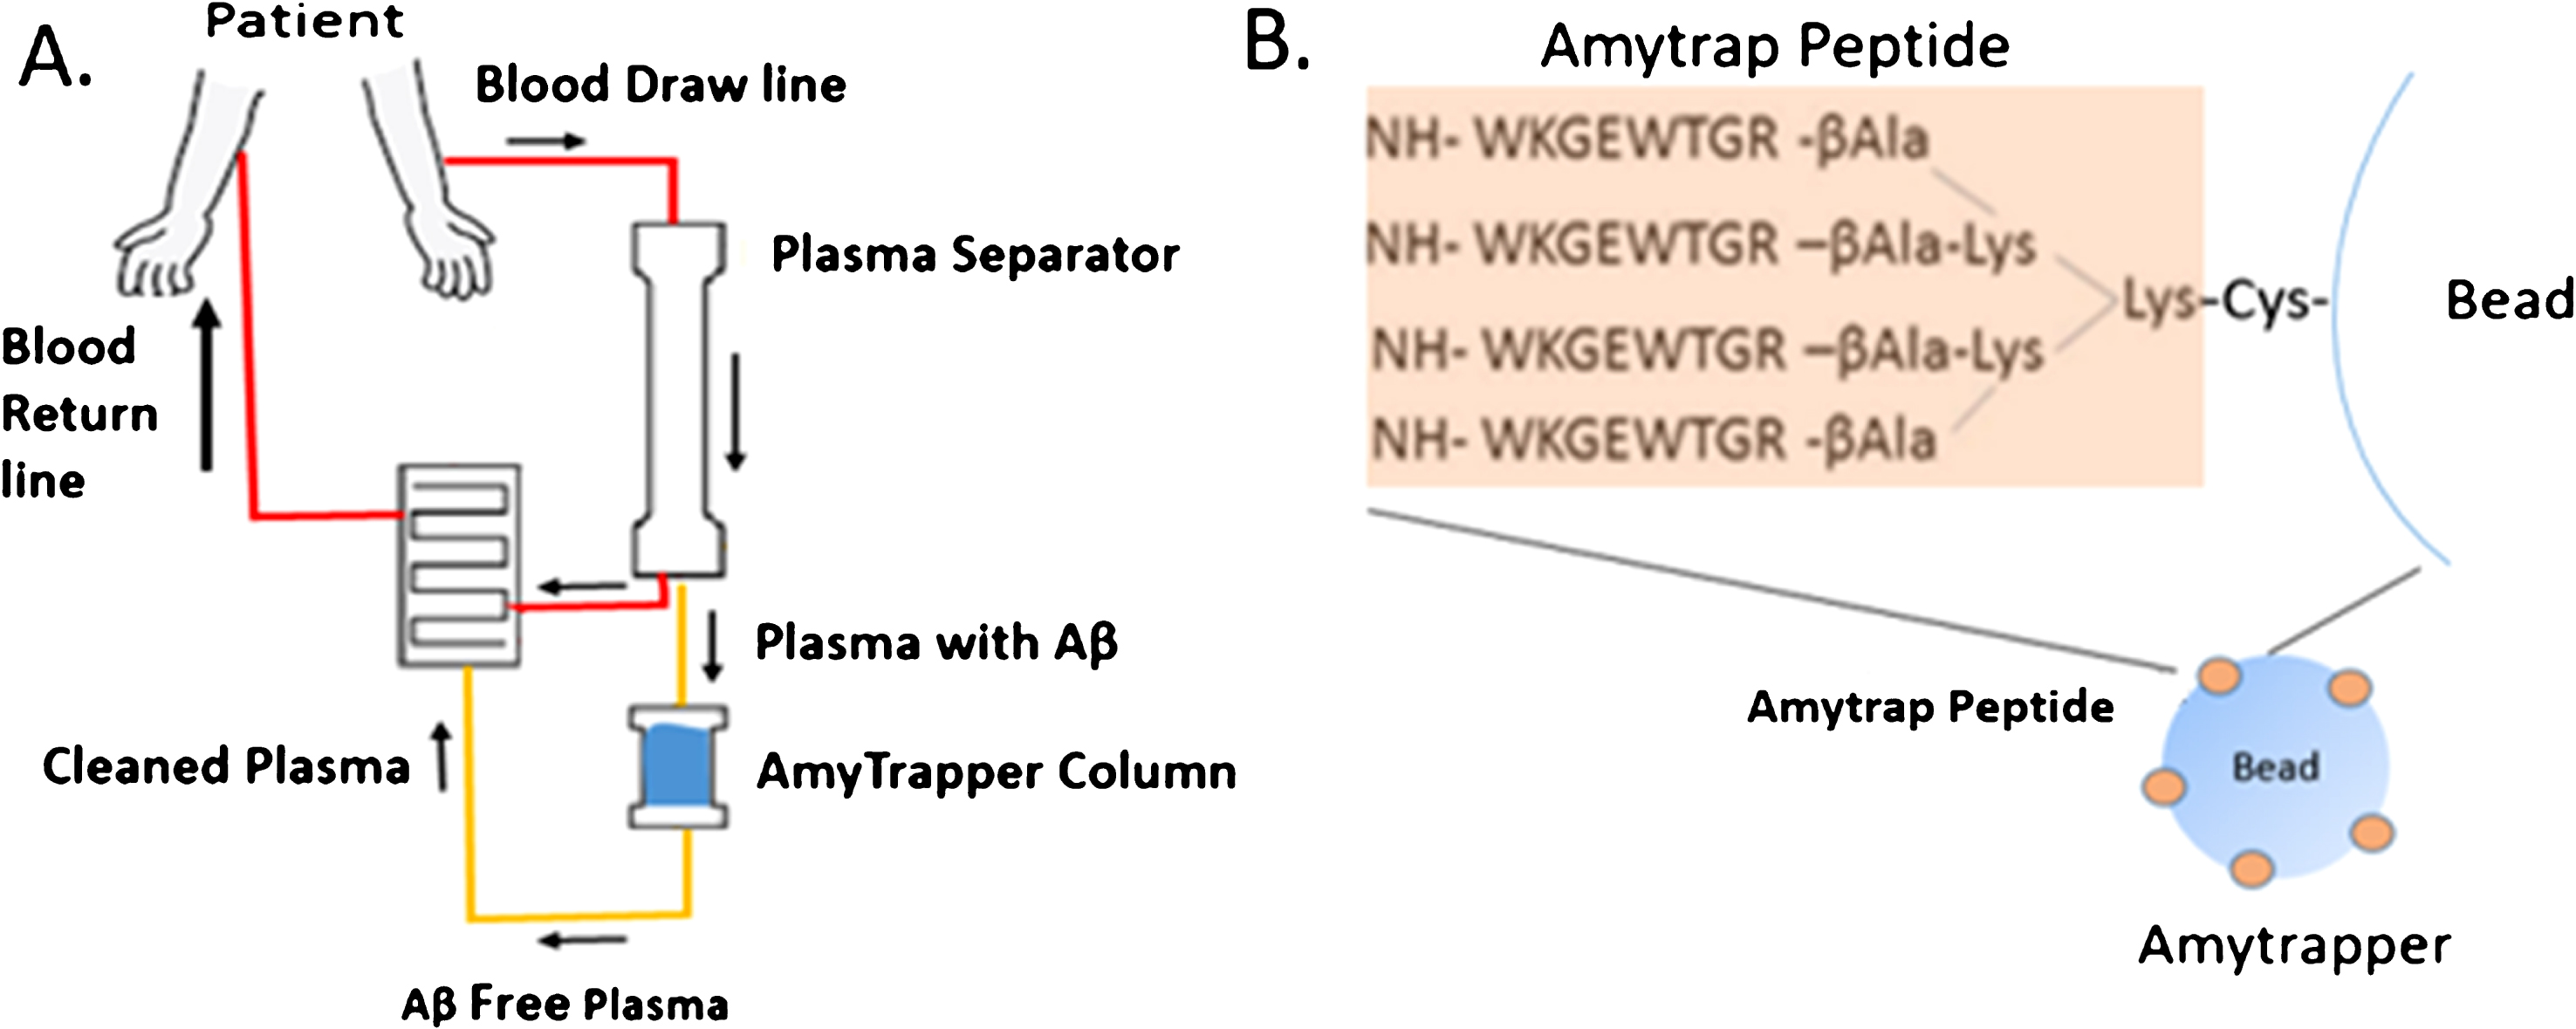 A) Flowchart of Amytrapper, a treatment option for Alzheimer’s disease patients. Patient plasma is passed through Amytrapper where API conjugated sepharose beads sequester plasma Aβ returning Aβ-free plasma to the patient. B) The Amytrap peptide, an Aβ binding retro-inverso peptide is conjugated to the bead by a PEG linker.